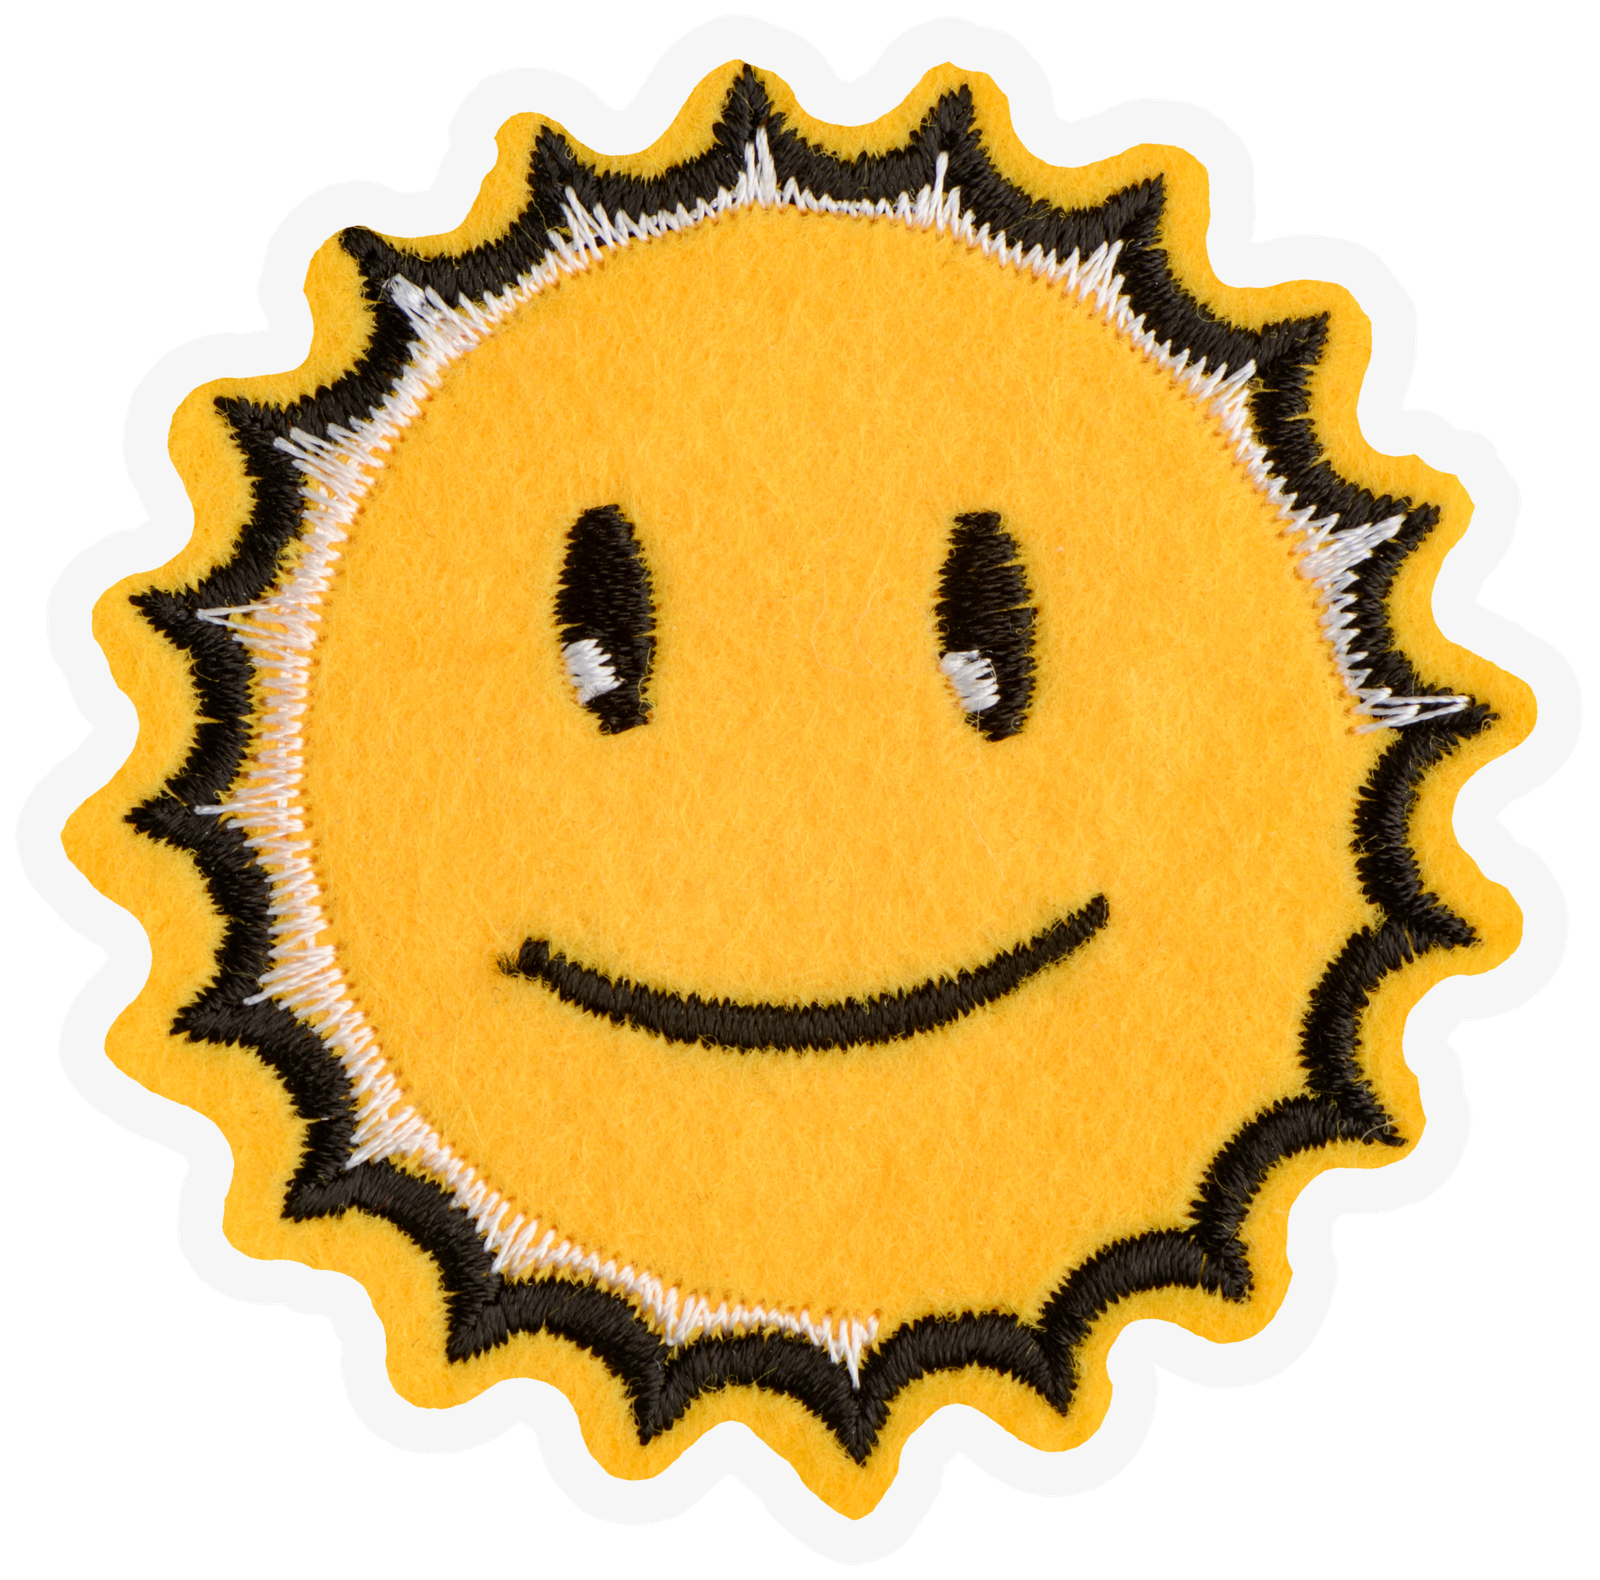 Smiling Sun Patch